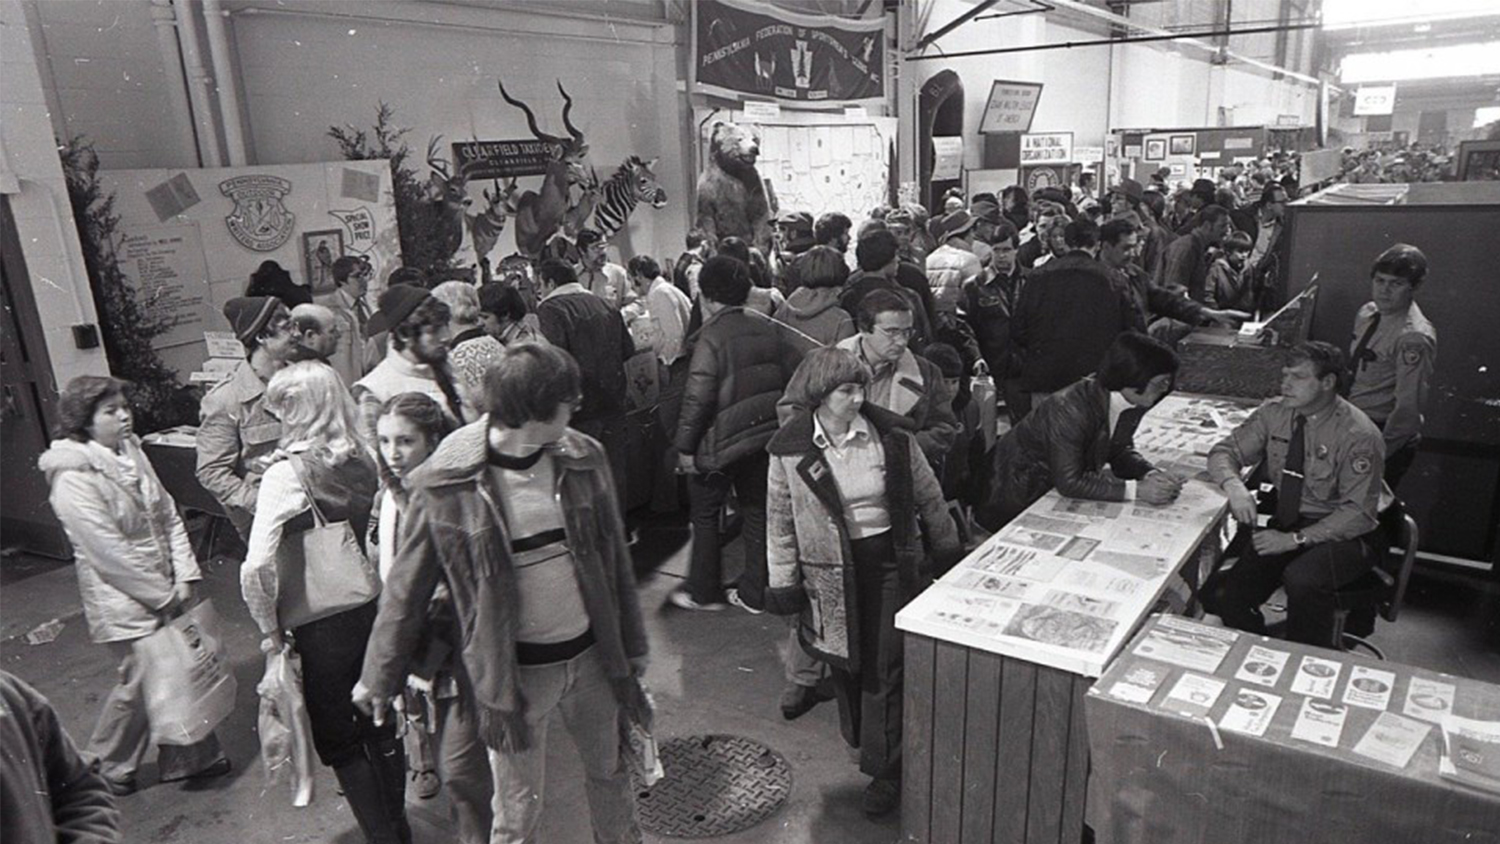 Throwback Thursday at  the Great American Outdoor Show